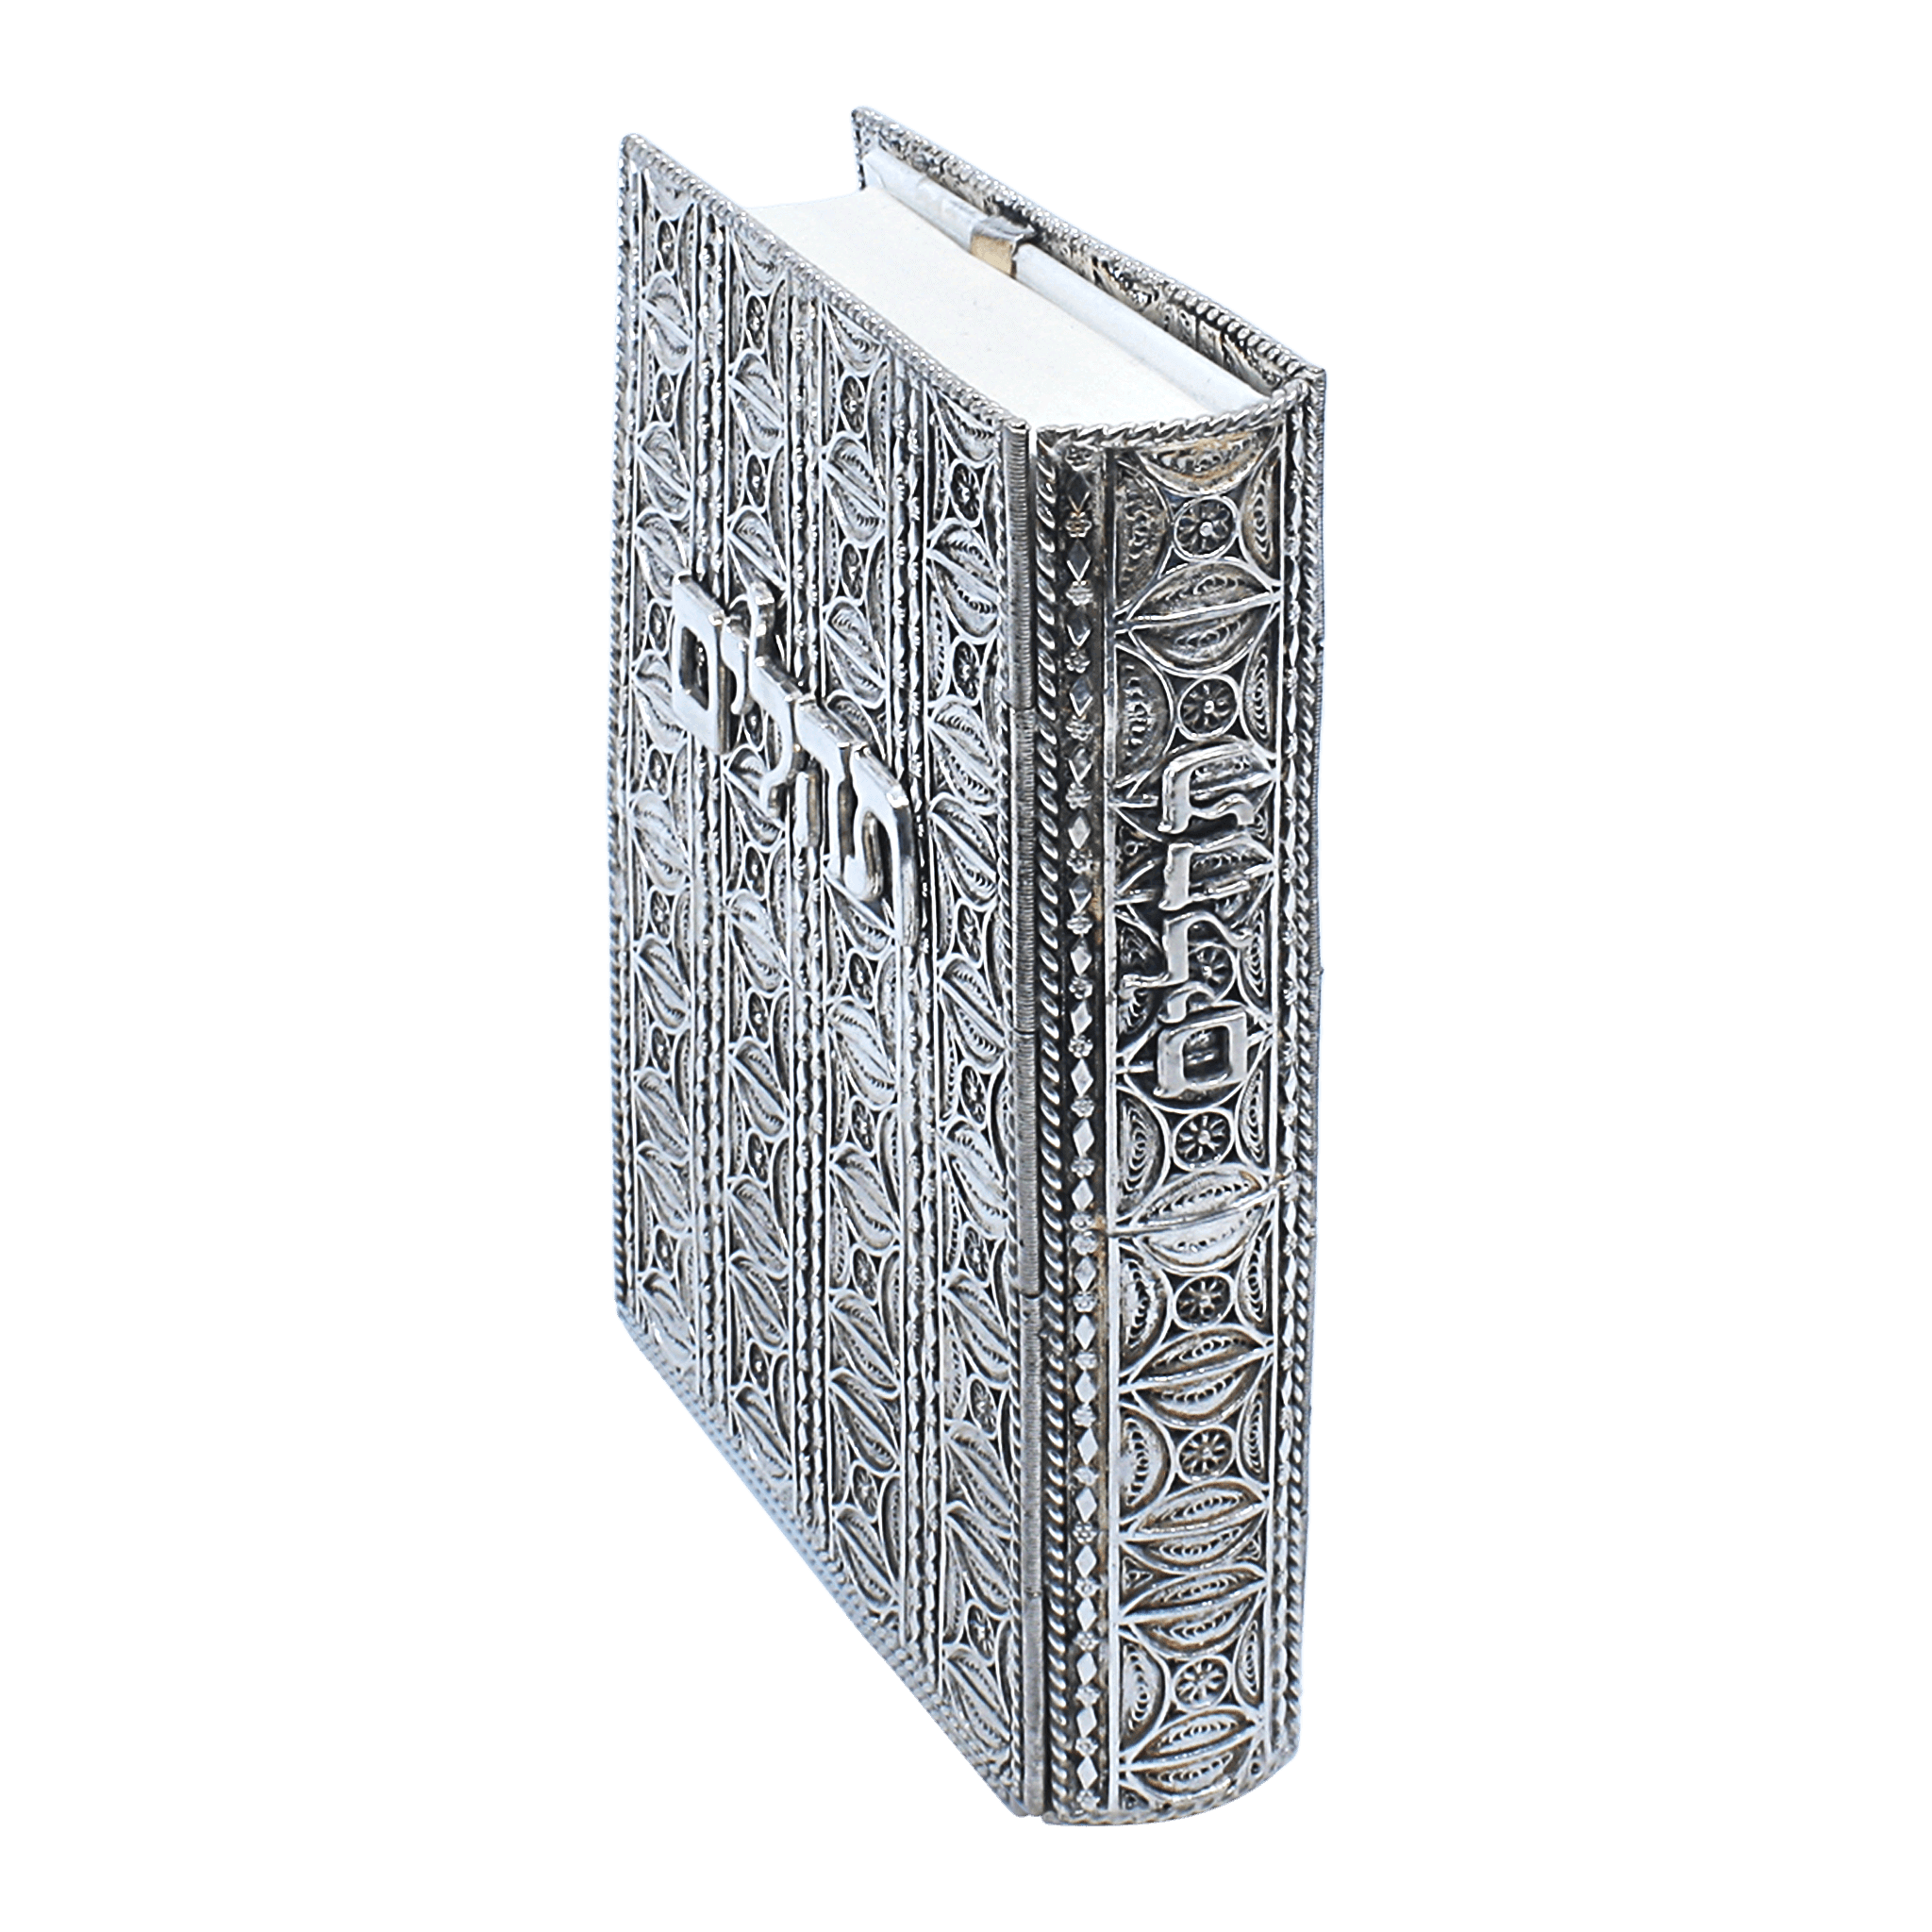 Psalms Silver Filigree Cover -A Piece By Zion Hadad